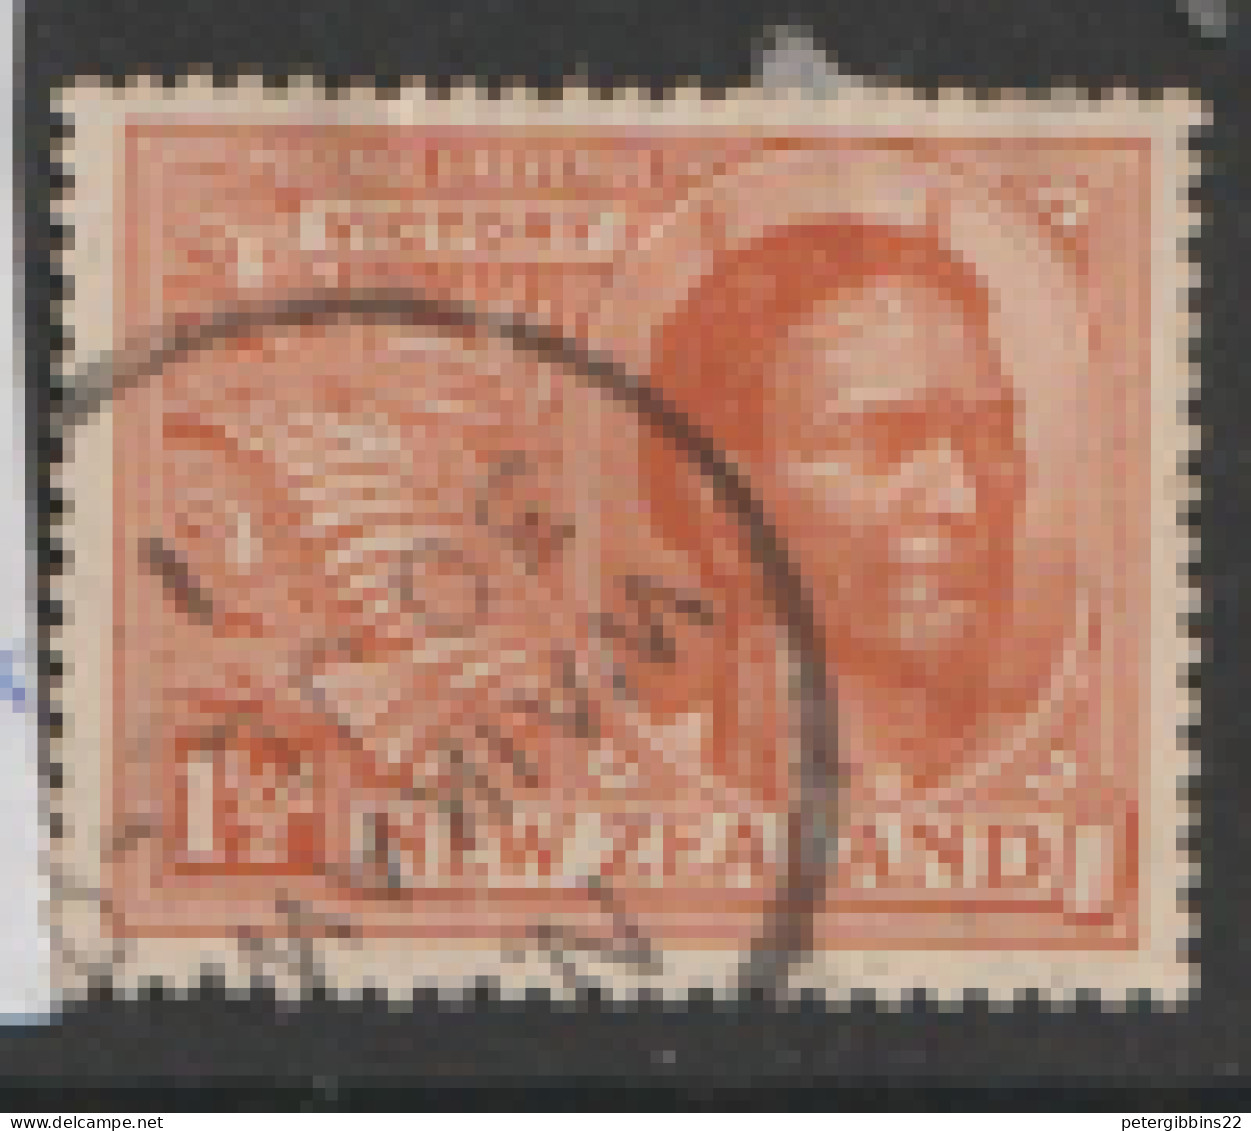 New  Zealand  1920 SG  455   1.1/2d Victory   Fine Used - Used Stamps